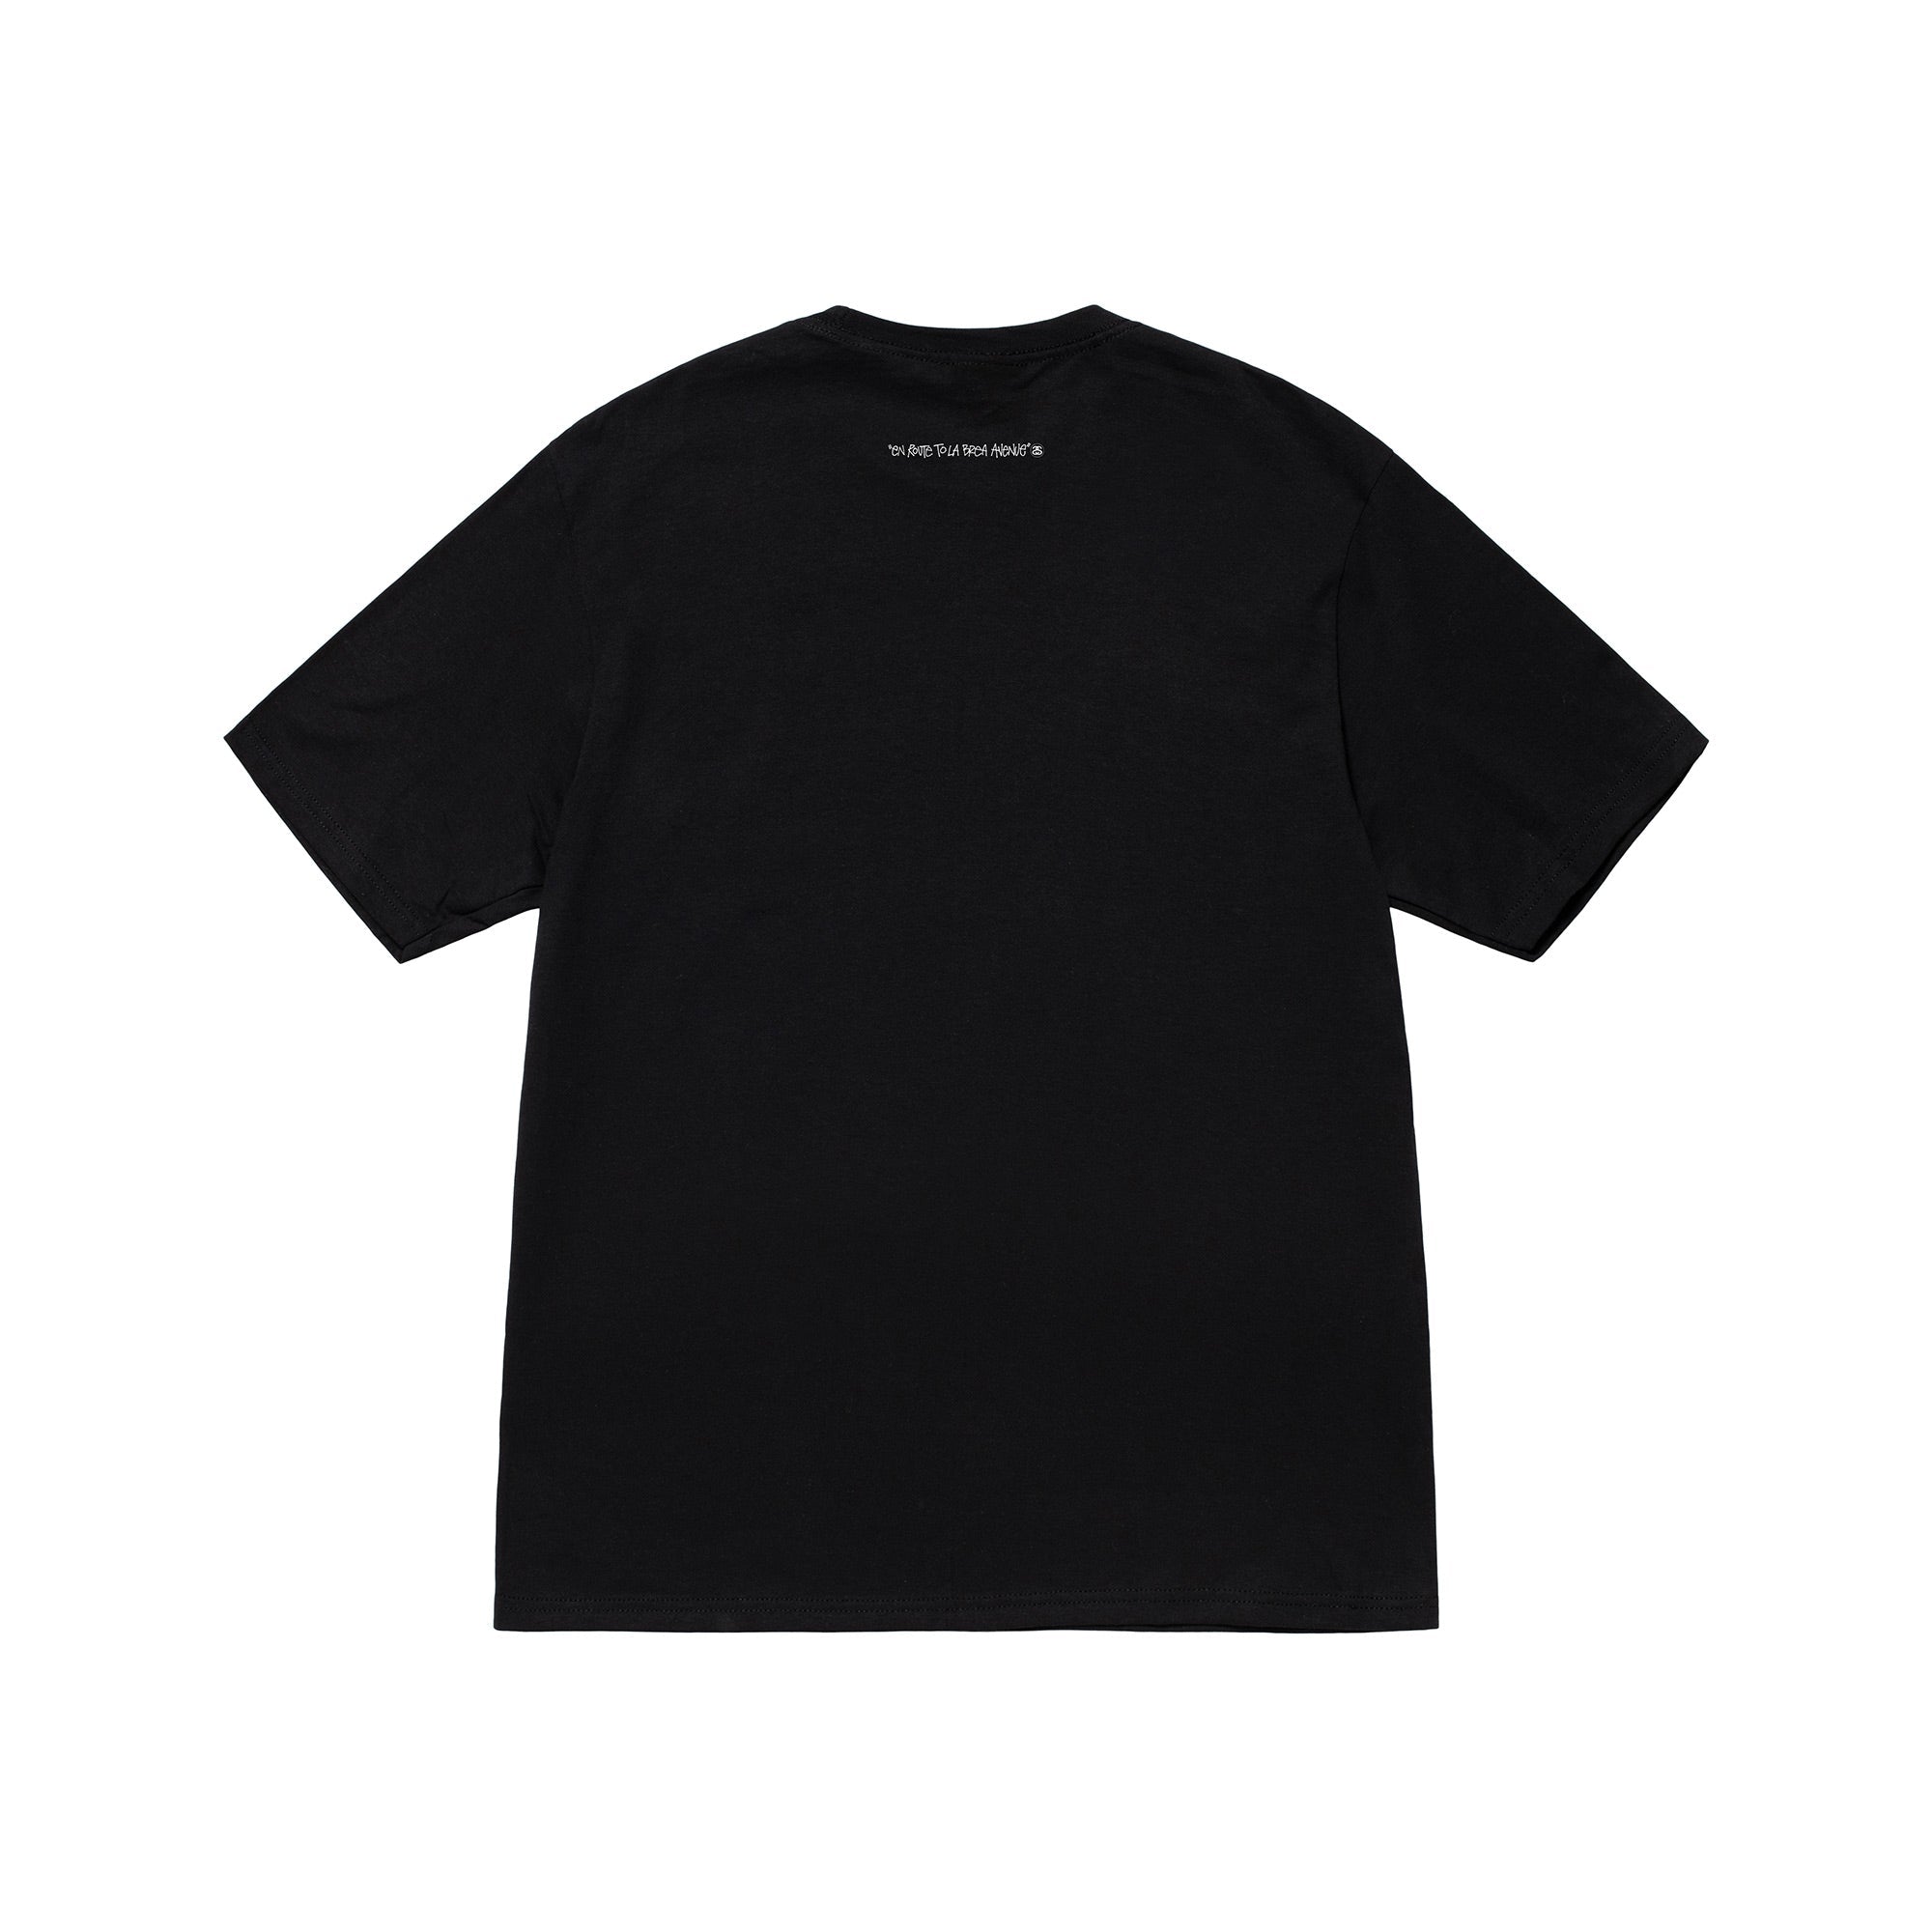 Back detail photo of the SS Highway Tee - Black.